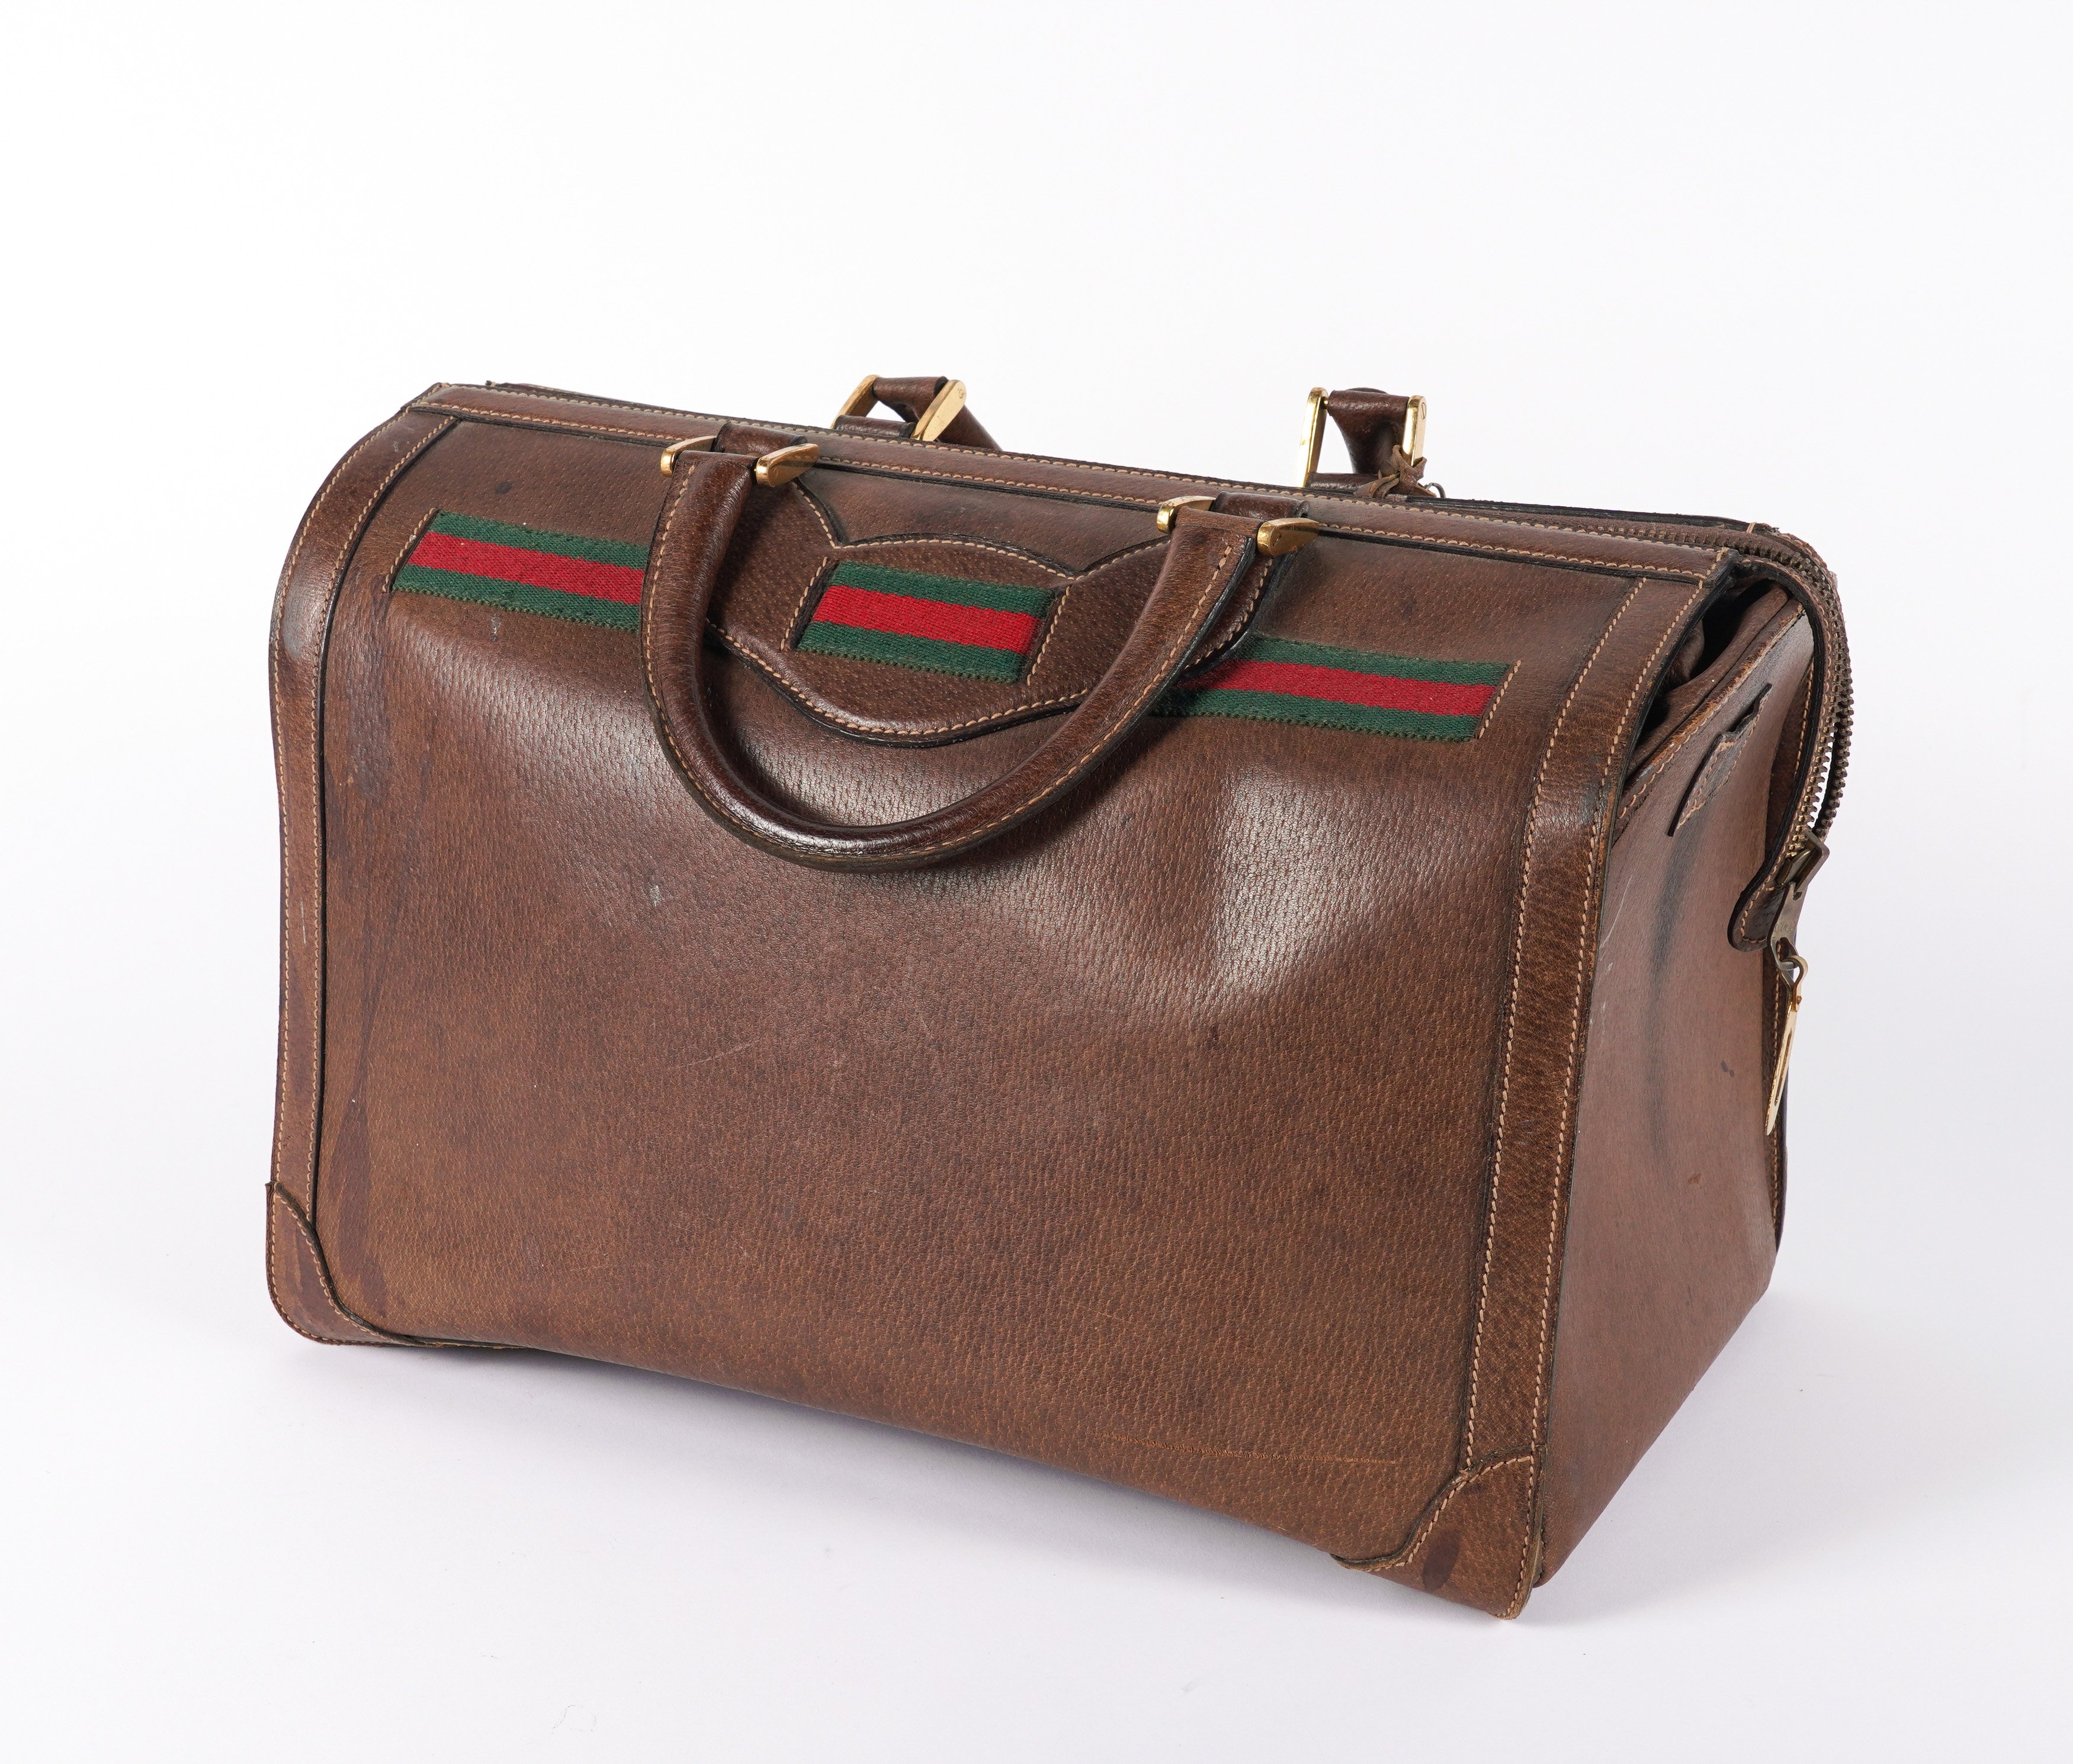 GUCCI: A BROWN LEATHER HOLDALL